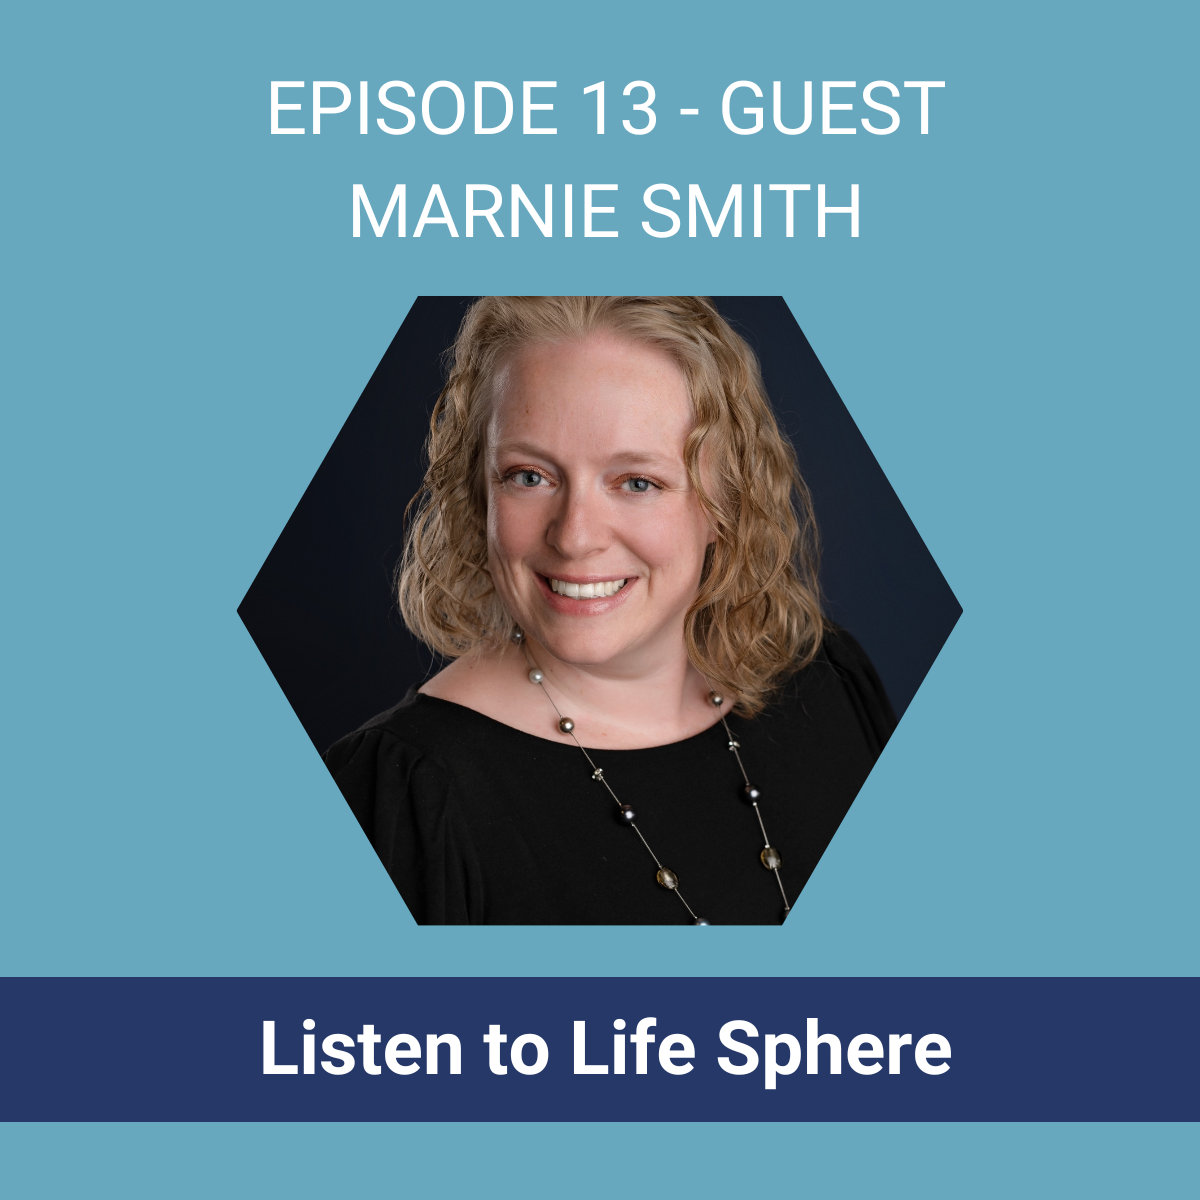 Marnie Smith Life Sphere Guest (1)